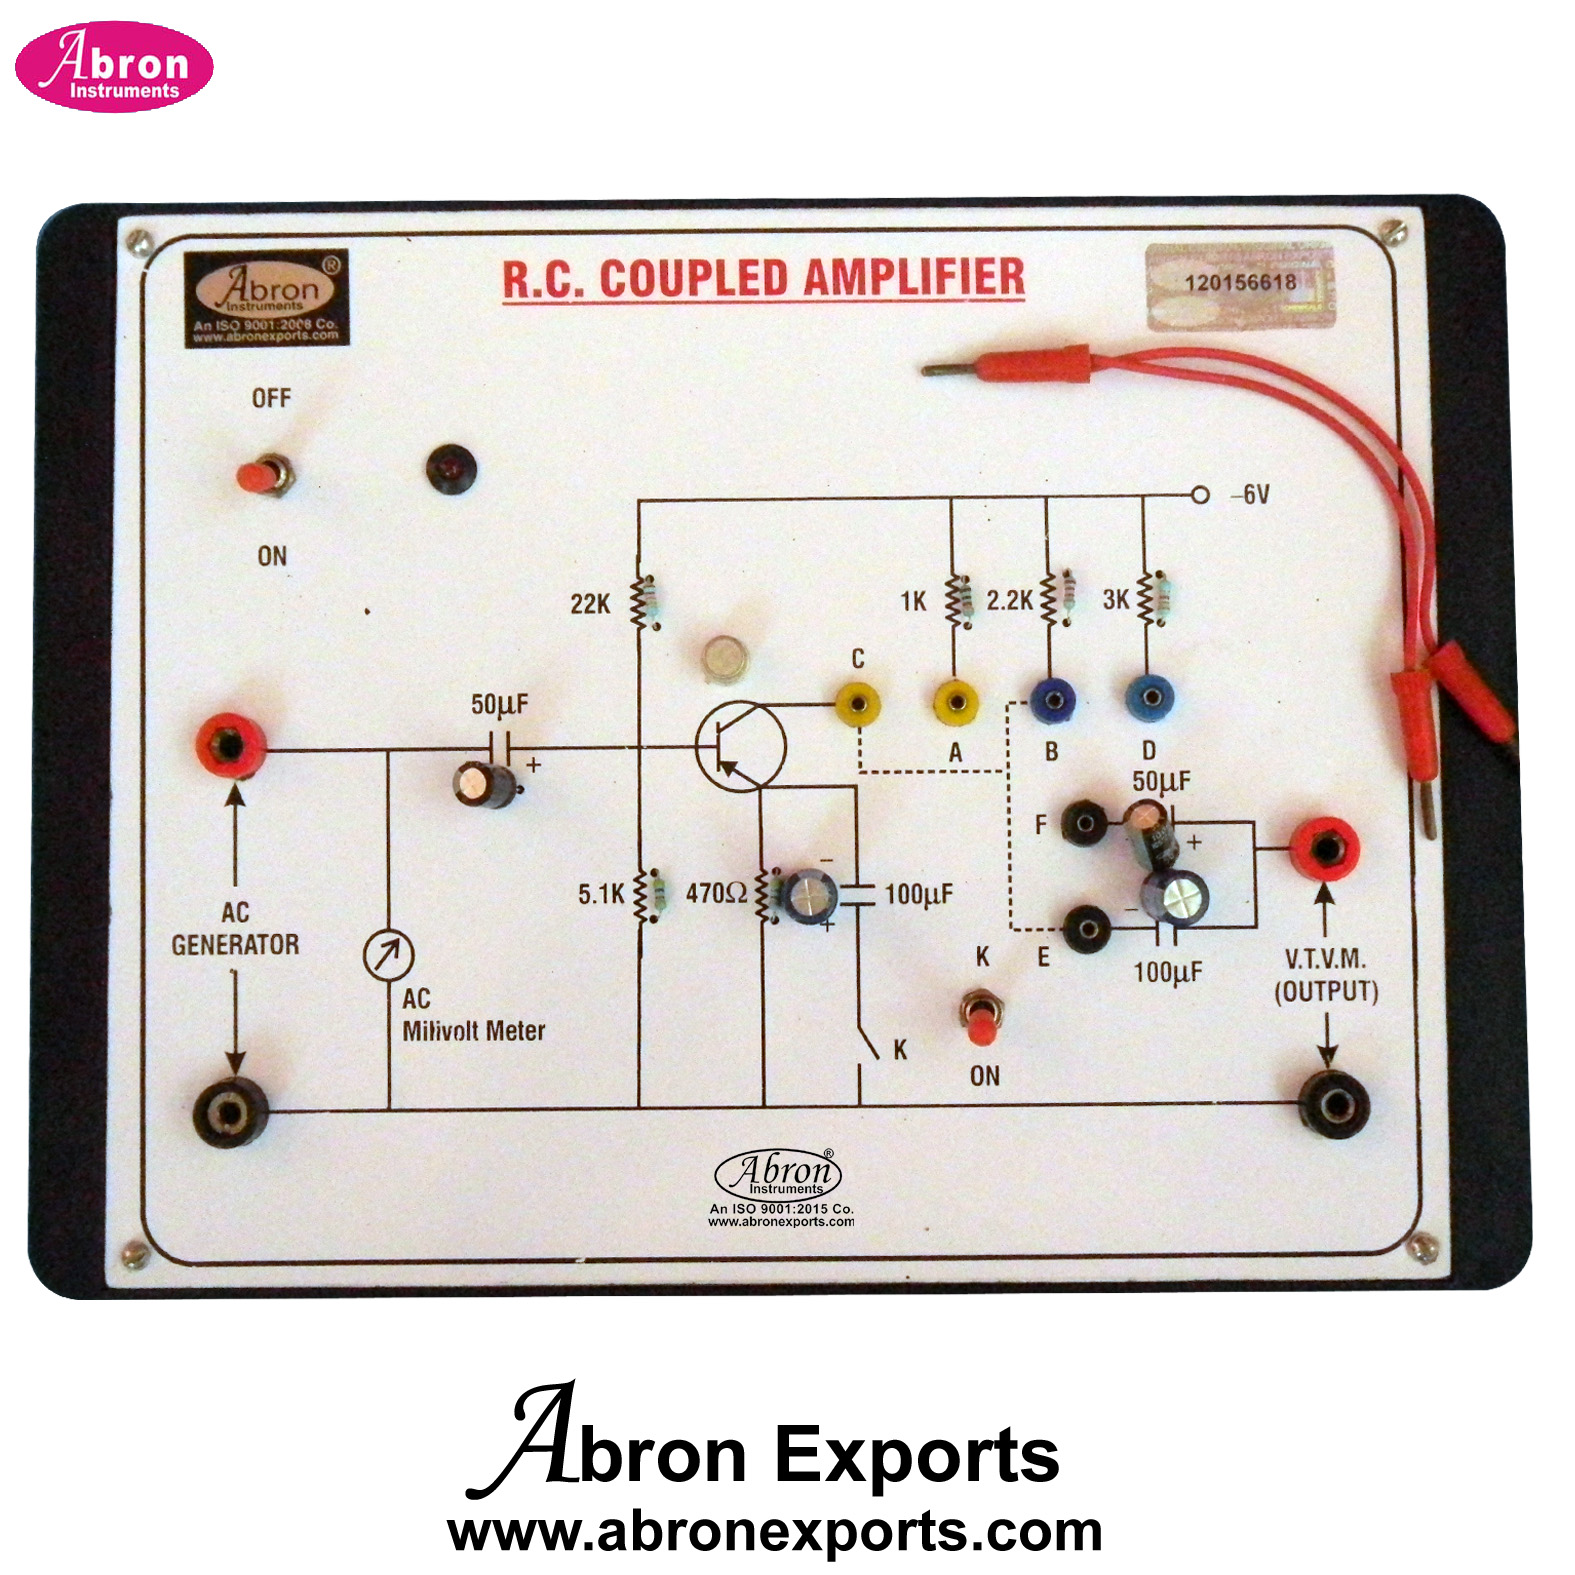 ETB RC Single Stage Coupled Amplifier output to Study on CRO Electronic Training Board Sockets Supply Abron AE-1258RC1 